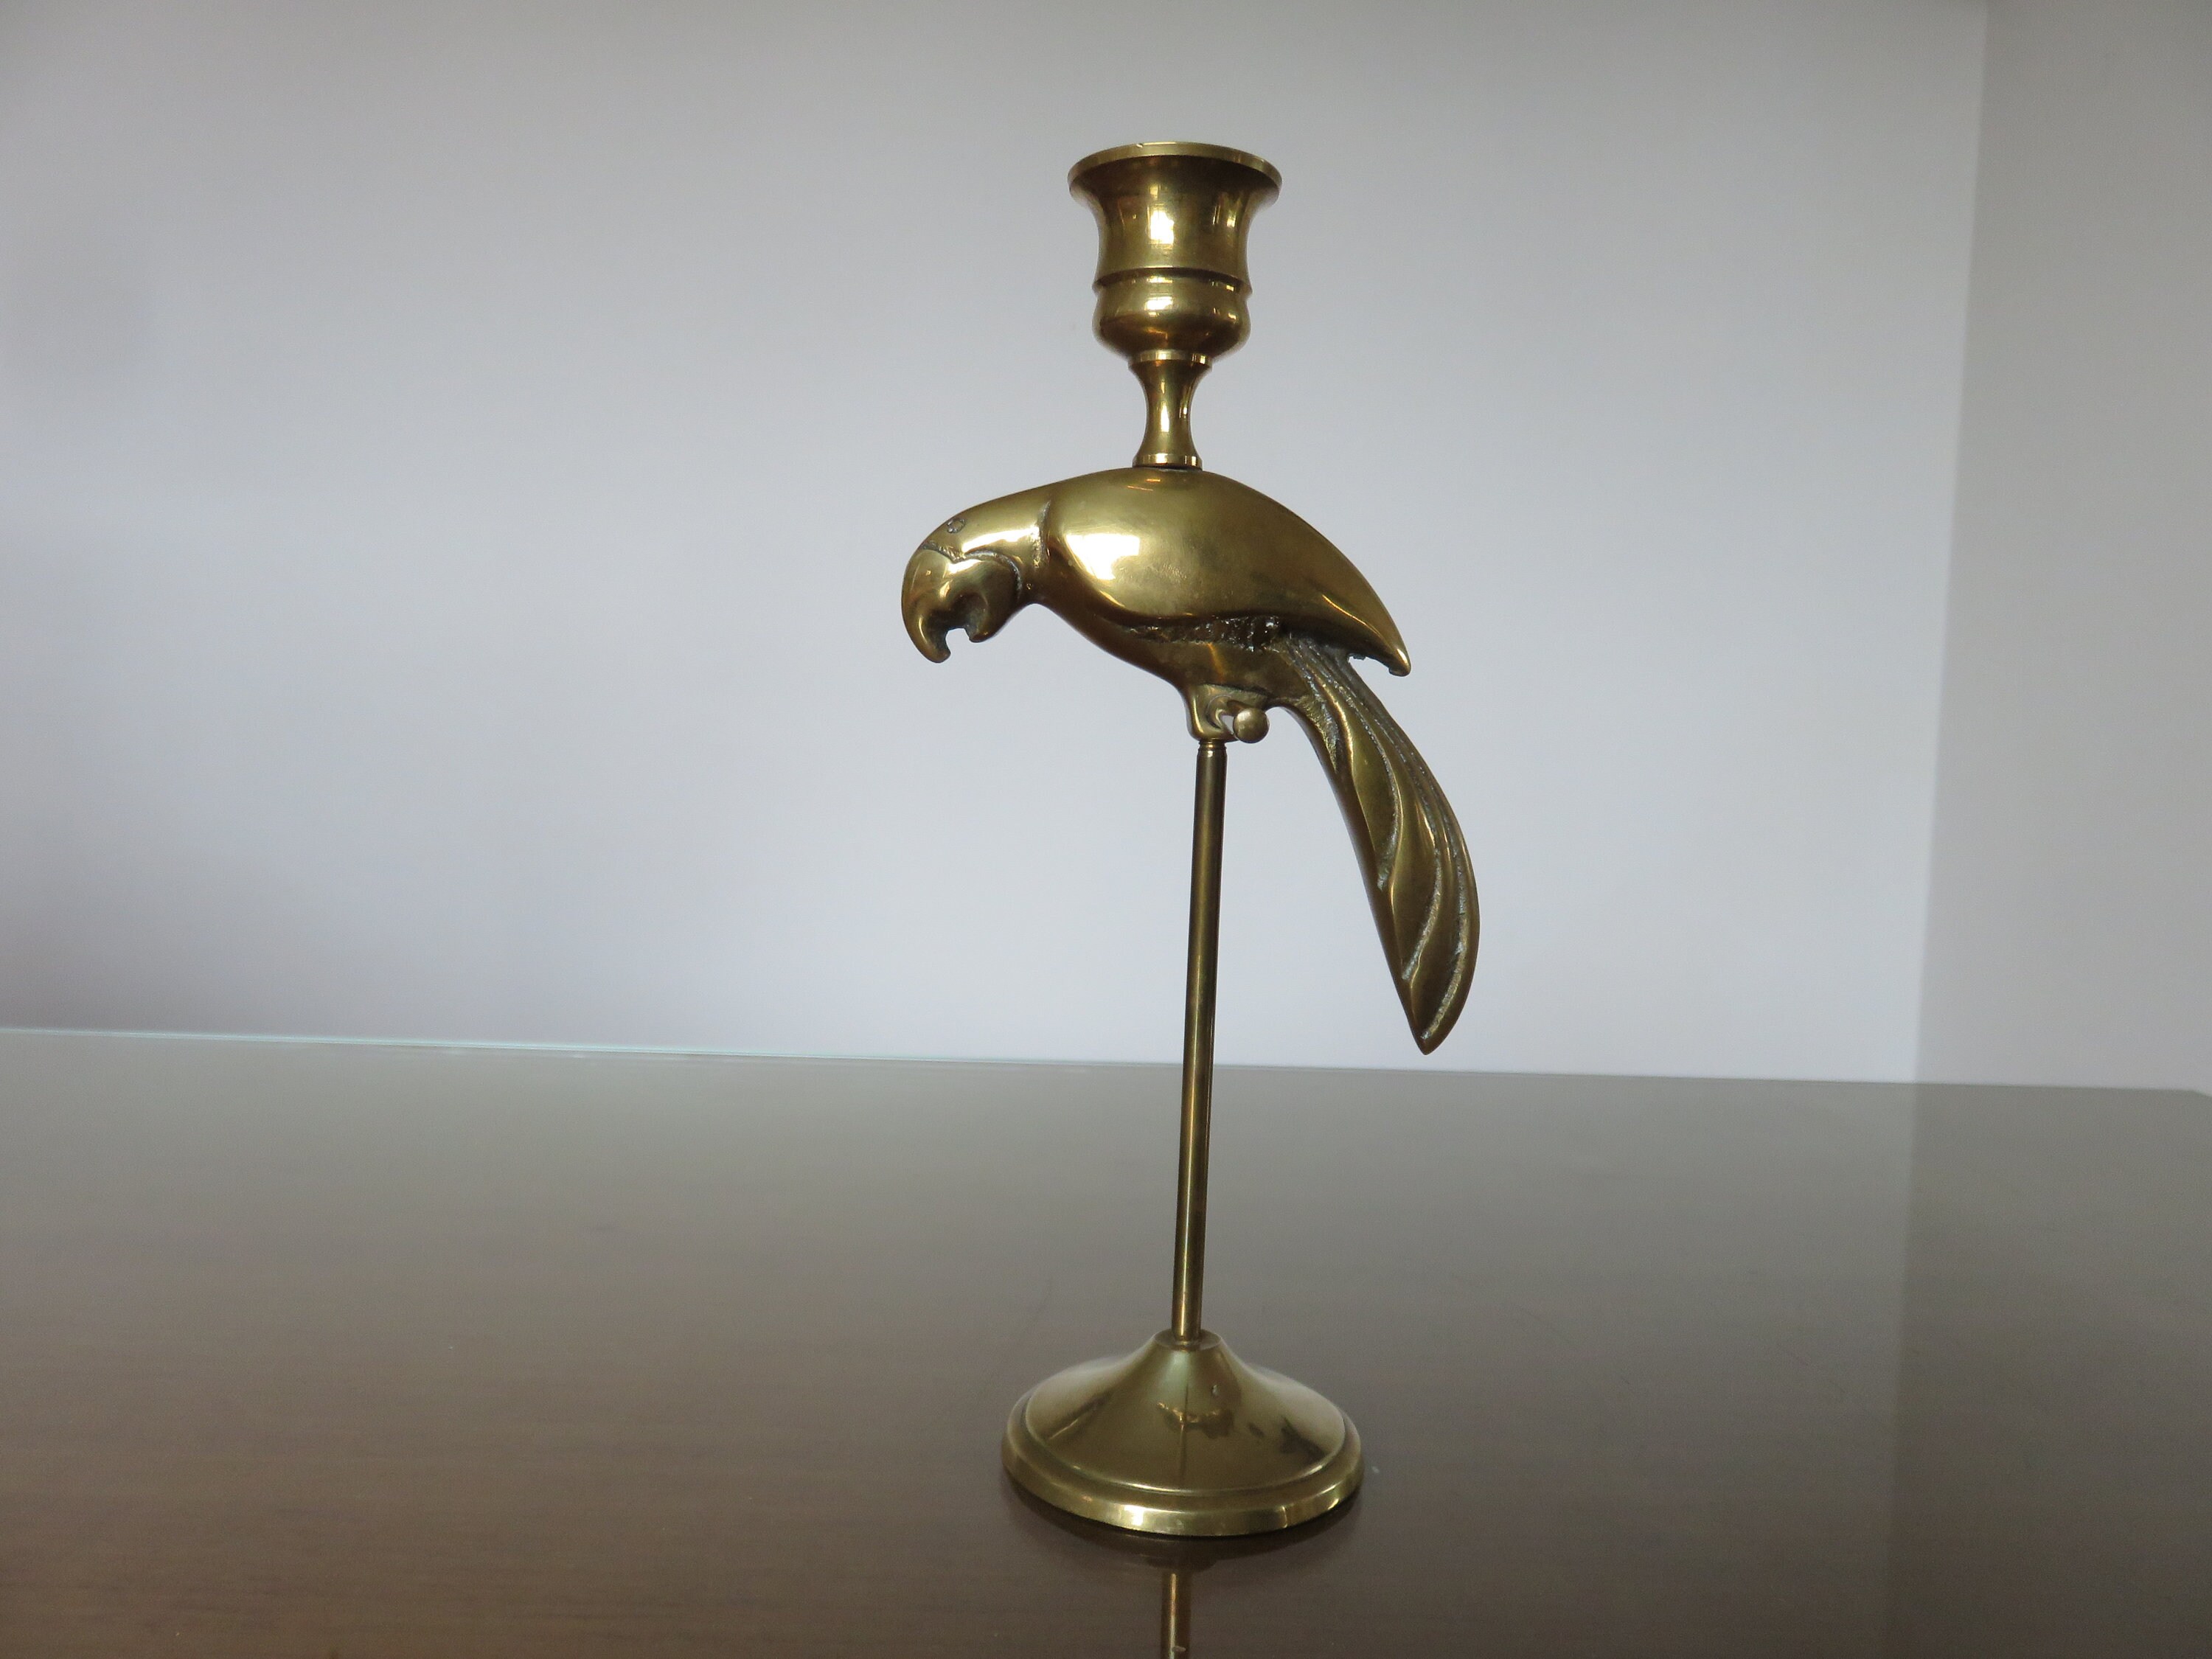 Bougeoir Perroquet en Laiton 1970 70's French Vintage Old Brass Parrot Candlestick